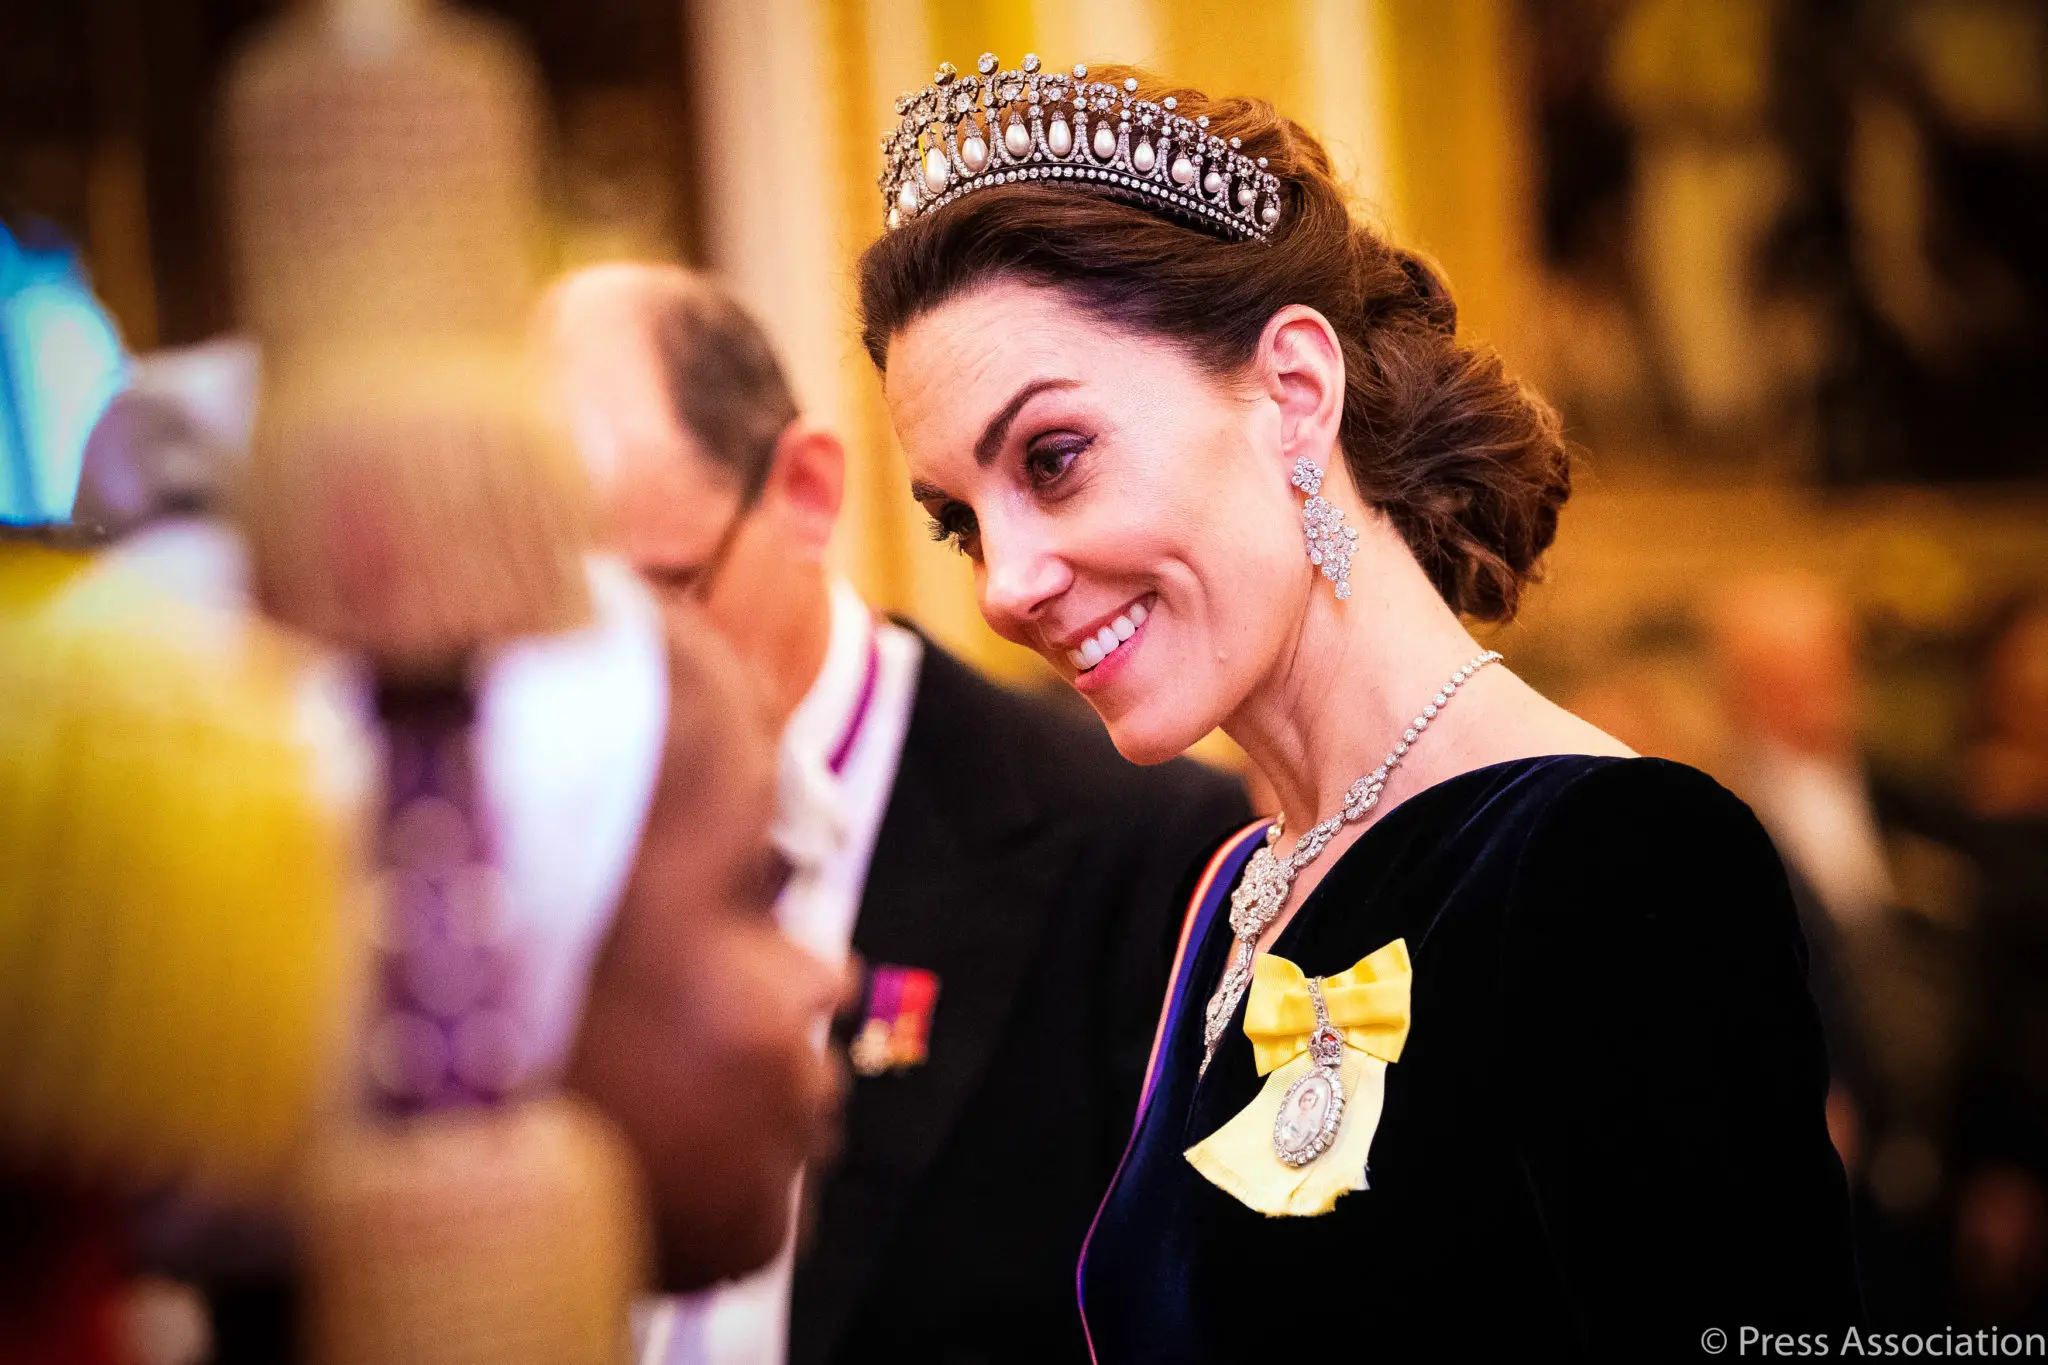 Duchess of Cambridge wore navy velvet Alexander McQueen gown at the annual Diplomatic reception